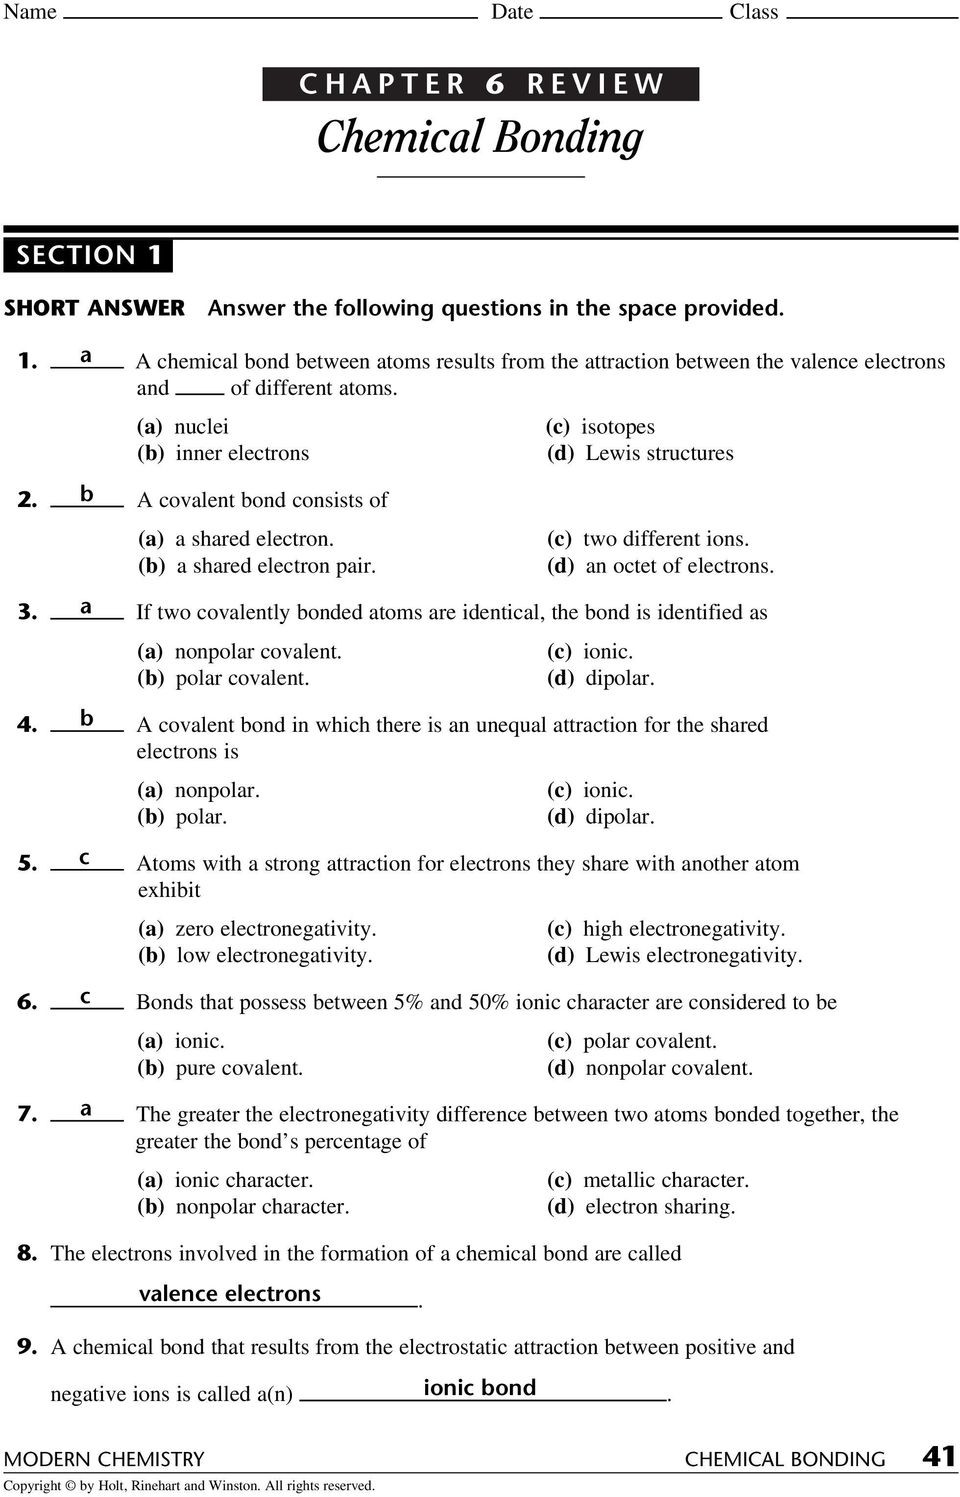 Chemical Bonding Worksheet Answers Chapter 6 Review Chemical Bonding Answer the Following